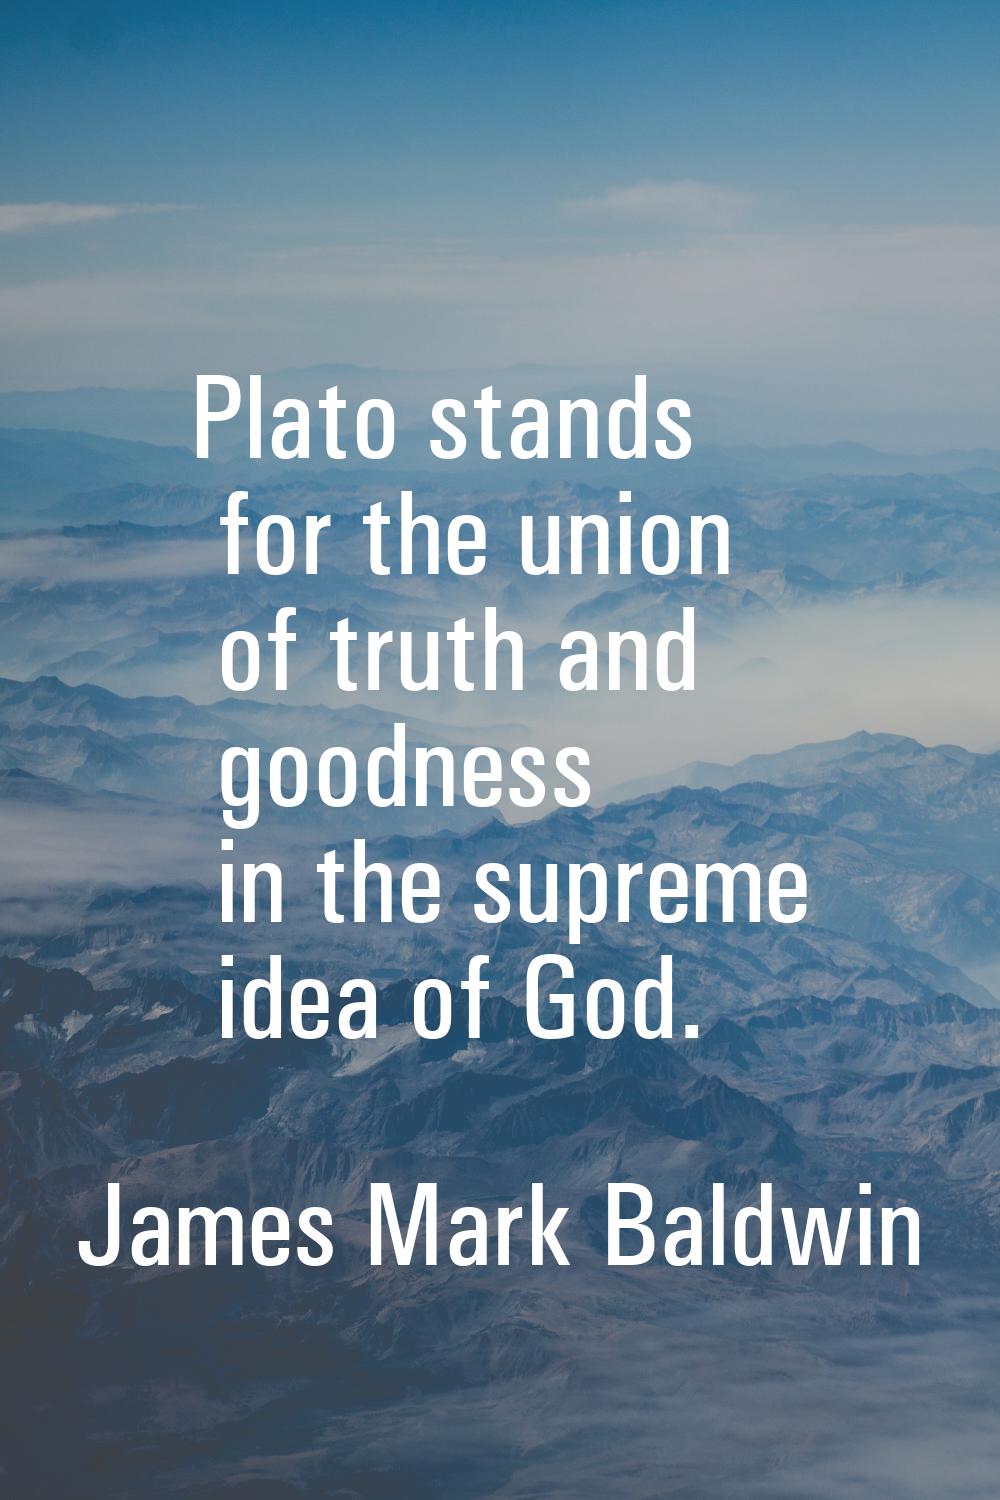 Plato stands for the union of truth and goodness in the supreme idea of God.